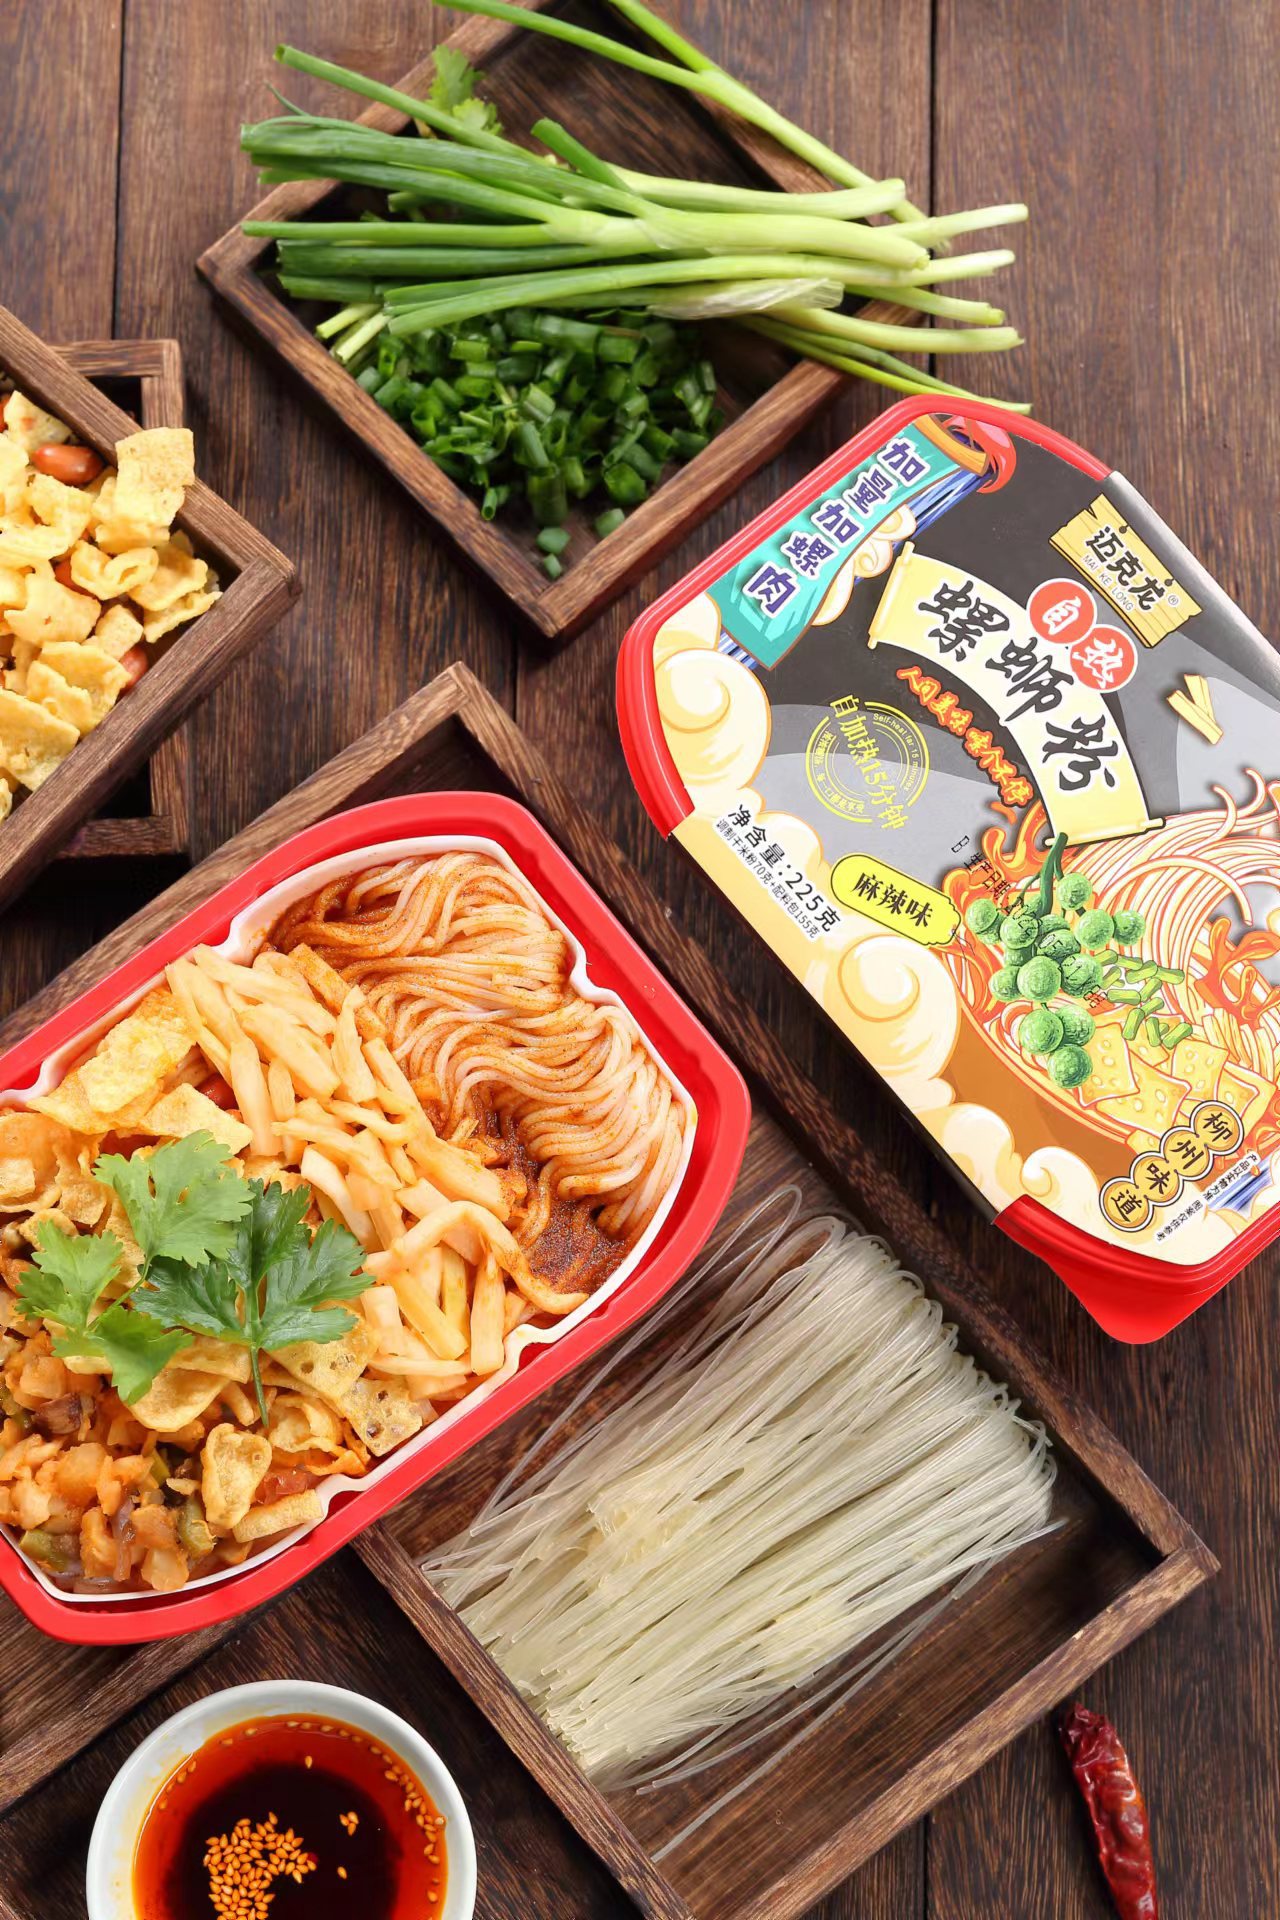 Mike Long Guangxi Orthodox school Snail powder Liuzhou Bagged 225g Fusilli Rice noodles Hot and Sour Rice Noodles